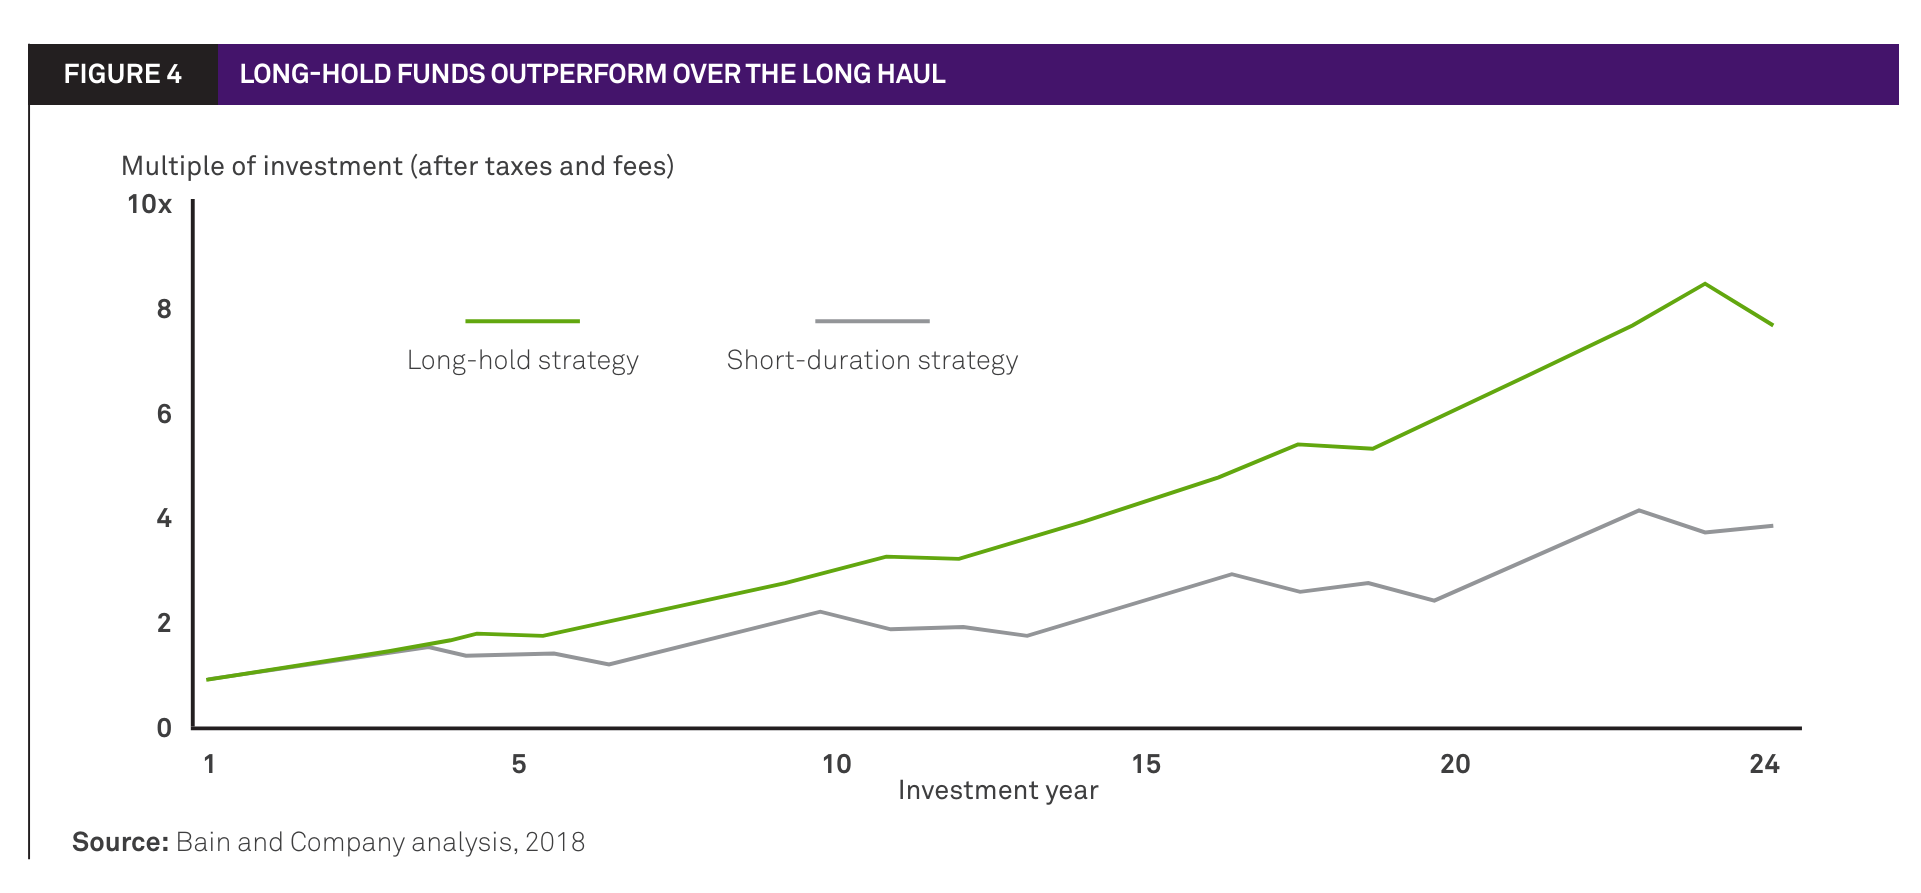 Long-hold funds outperform over the long haul